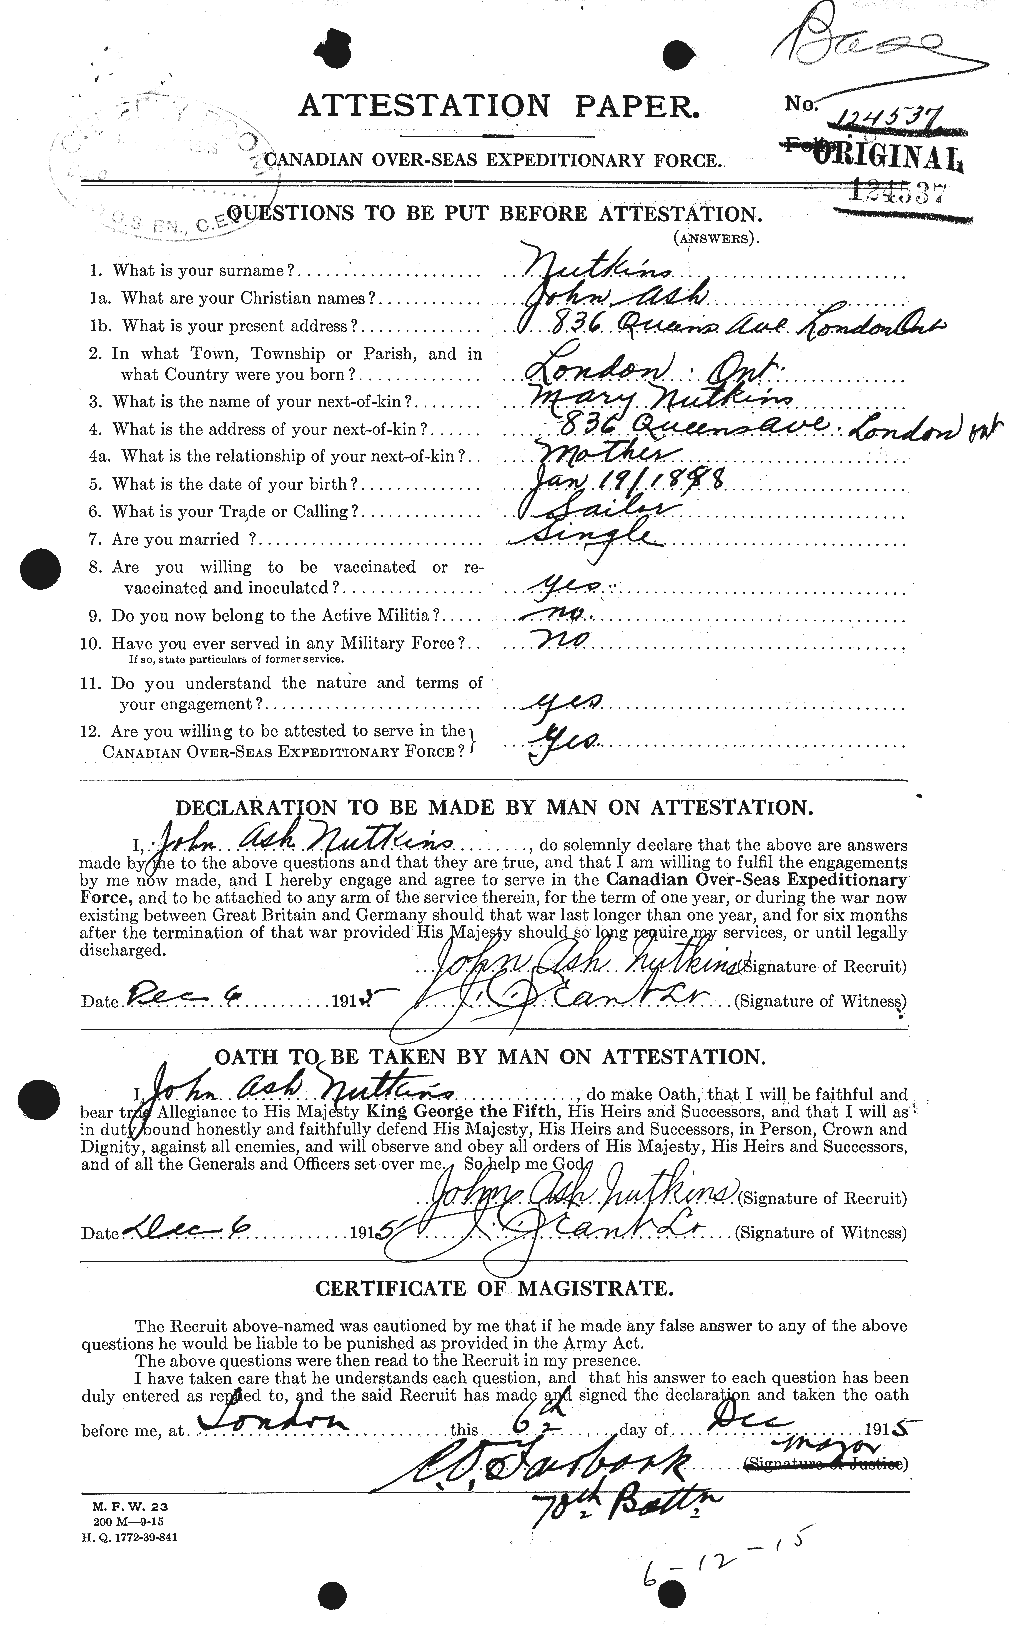 Personnel Records of the First World War - CEF 553411a